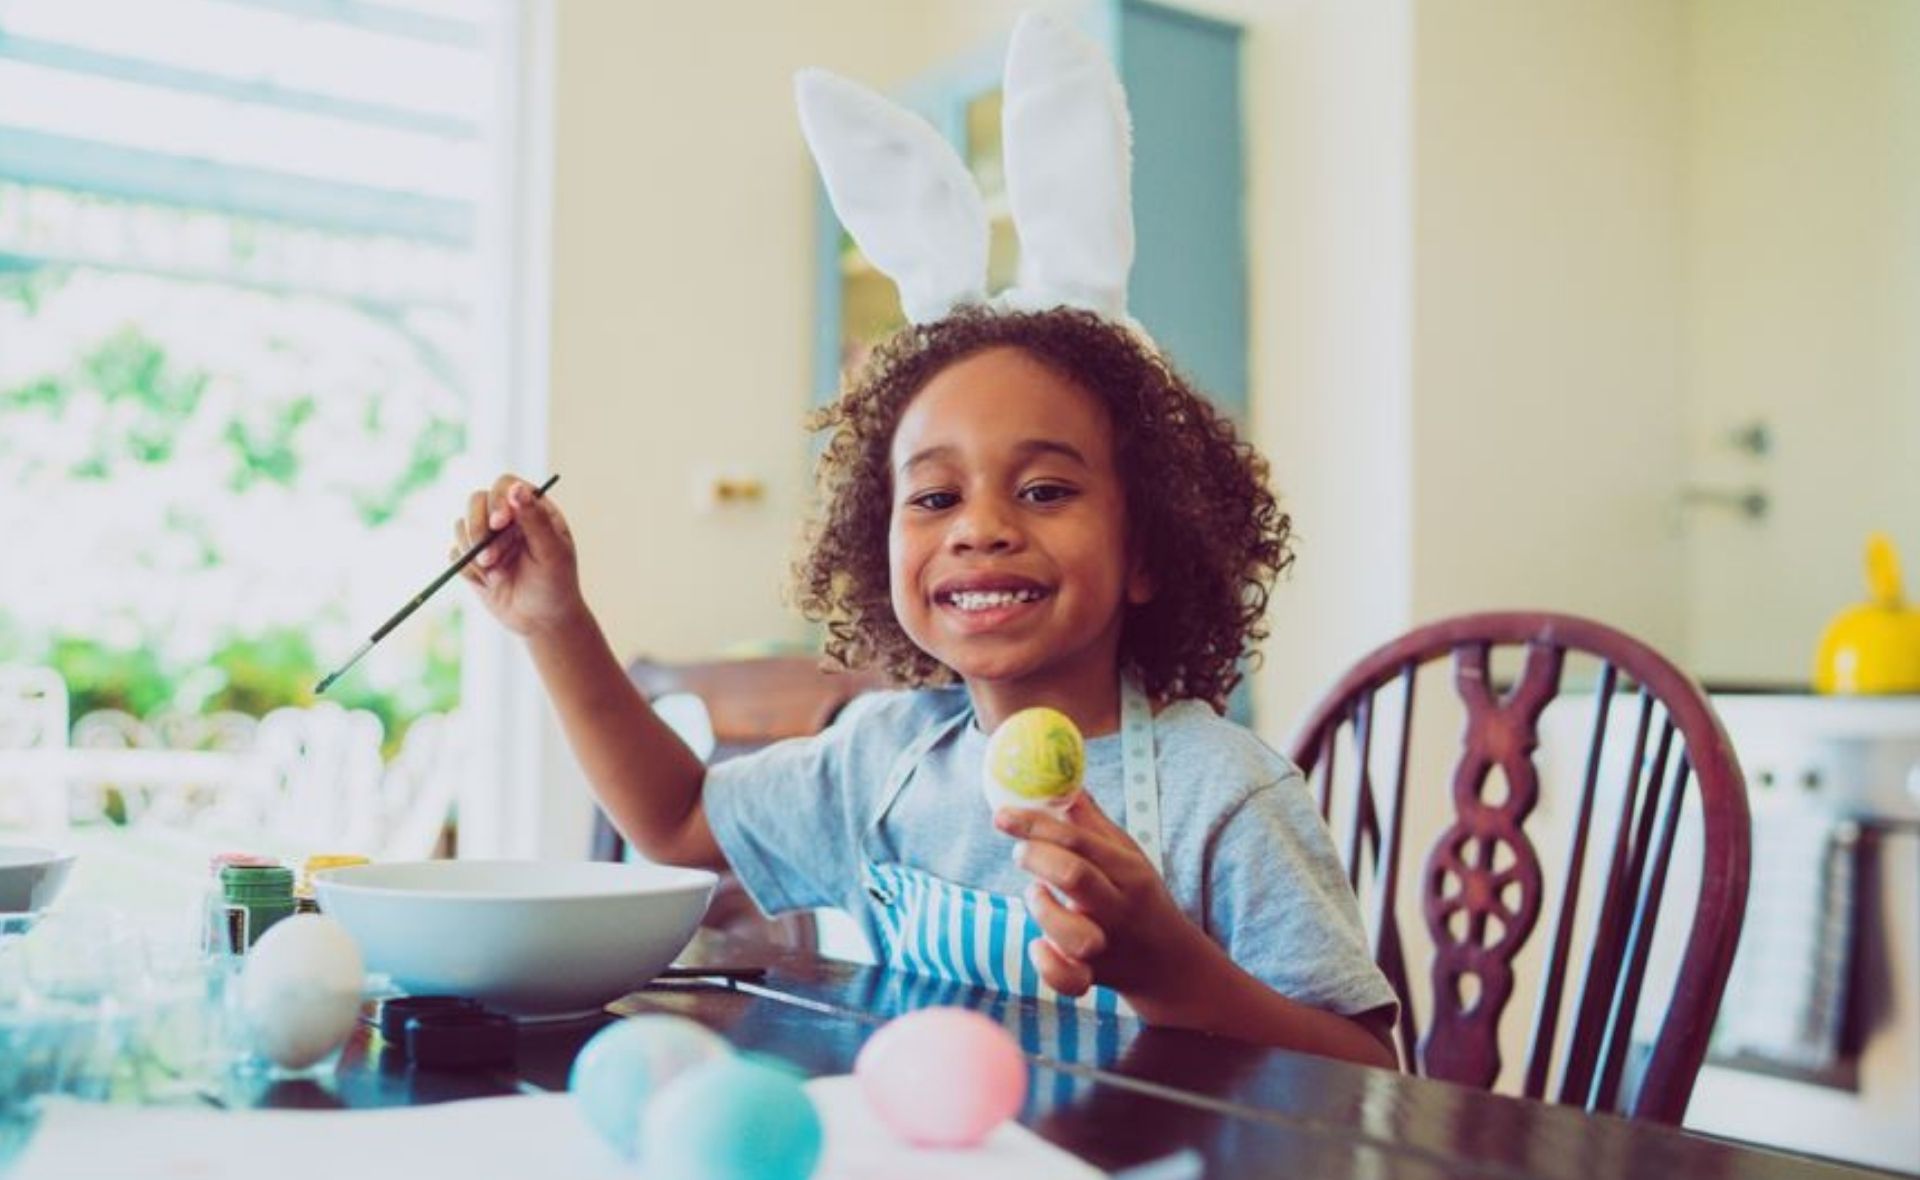 What day is the right day to give your kids their Easter eggs?